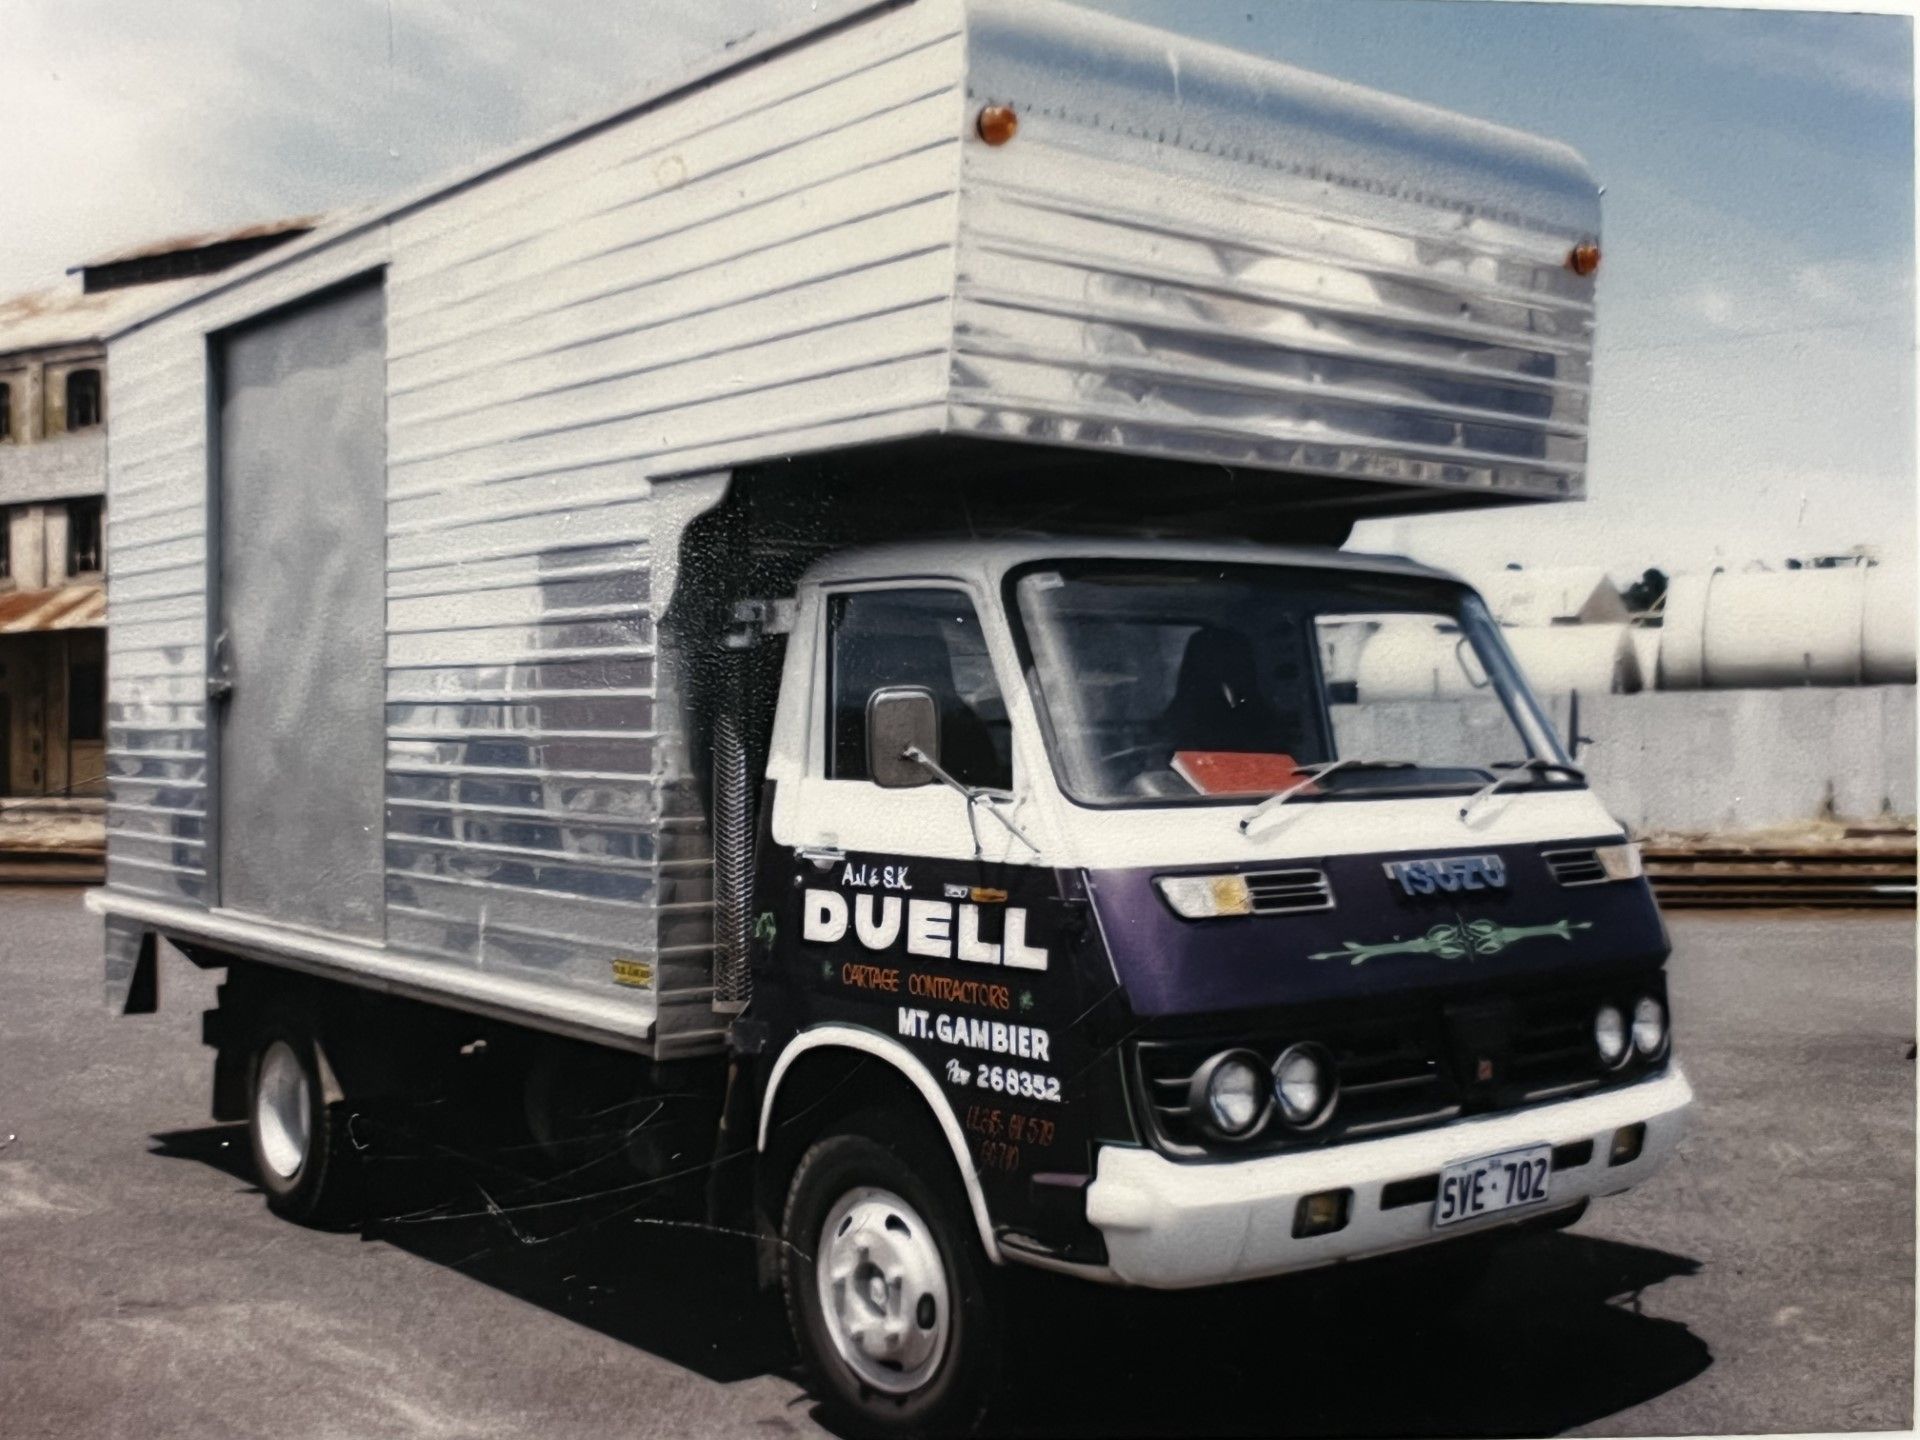 The TK model Isuzu used by Duells Furniture Removalists in the 1970s